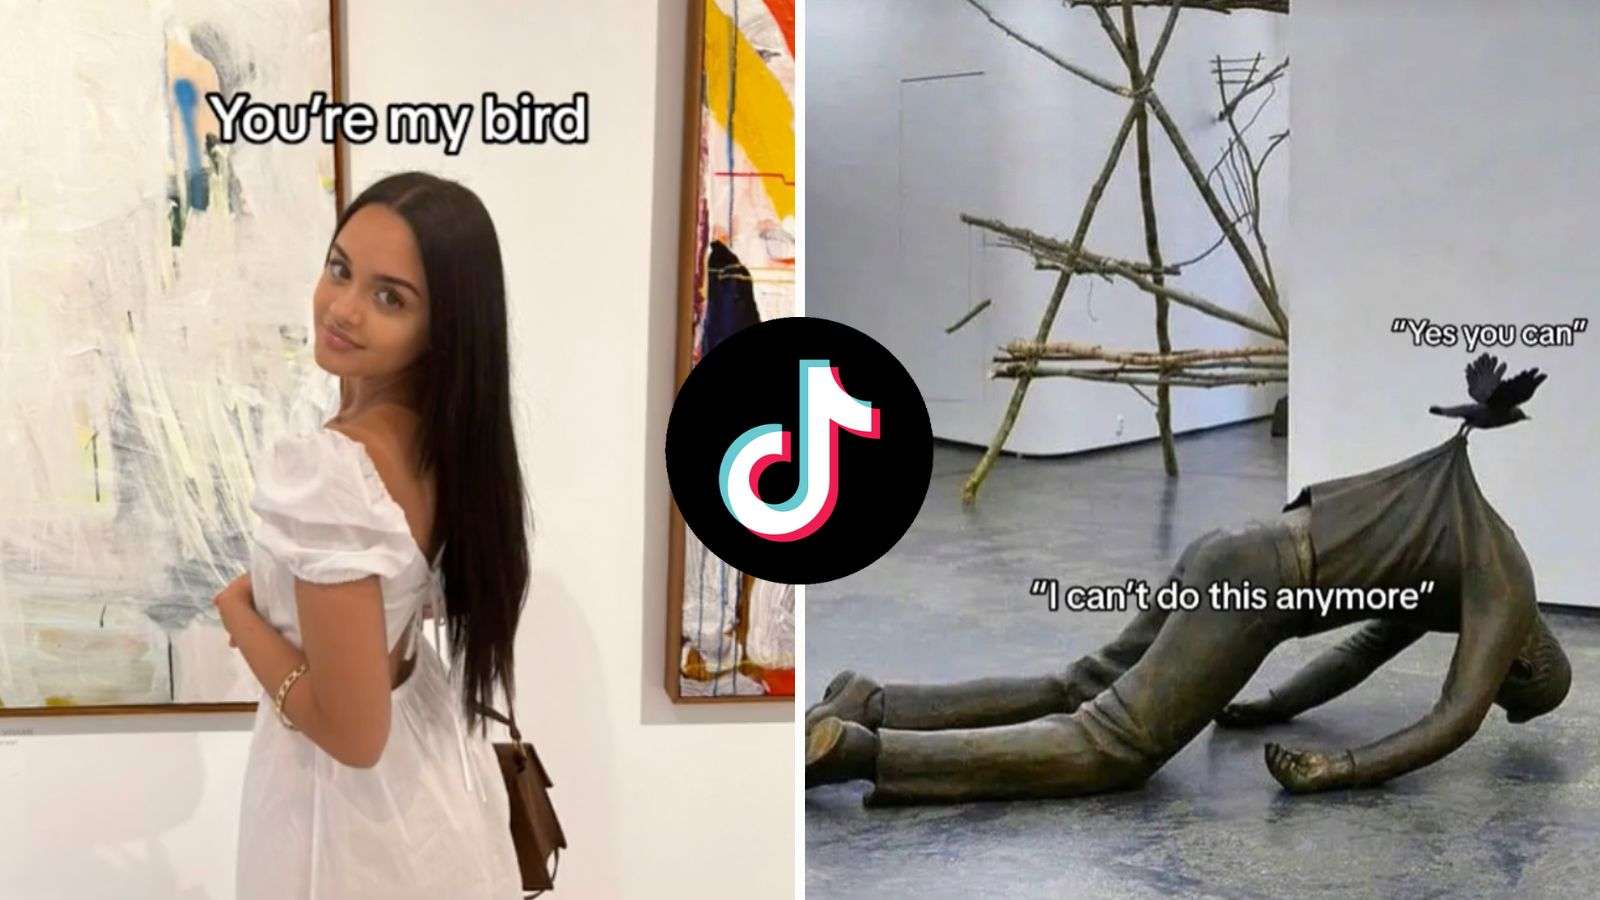 TikTok user participating in the 'you're my bird' trend.